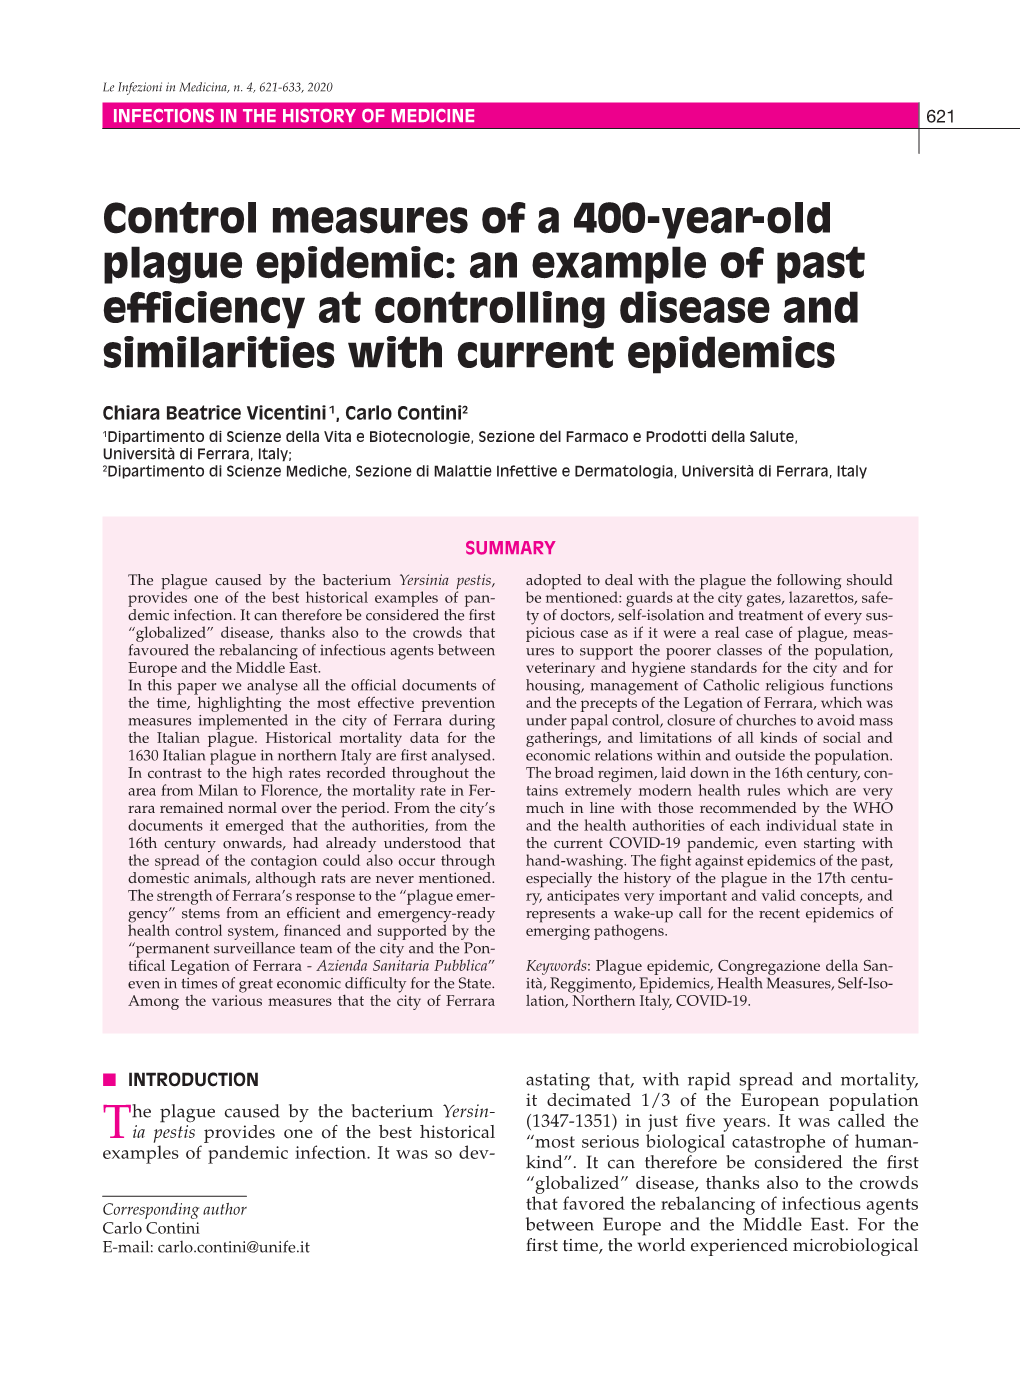 Control Measures of a 400-Year-Old Plague Epidemic: an Example of Past Efficiency at Controlling Disease and Similarities with Current Epidemics